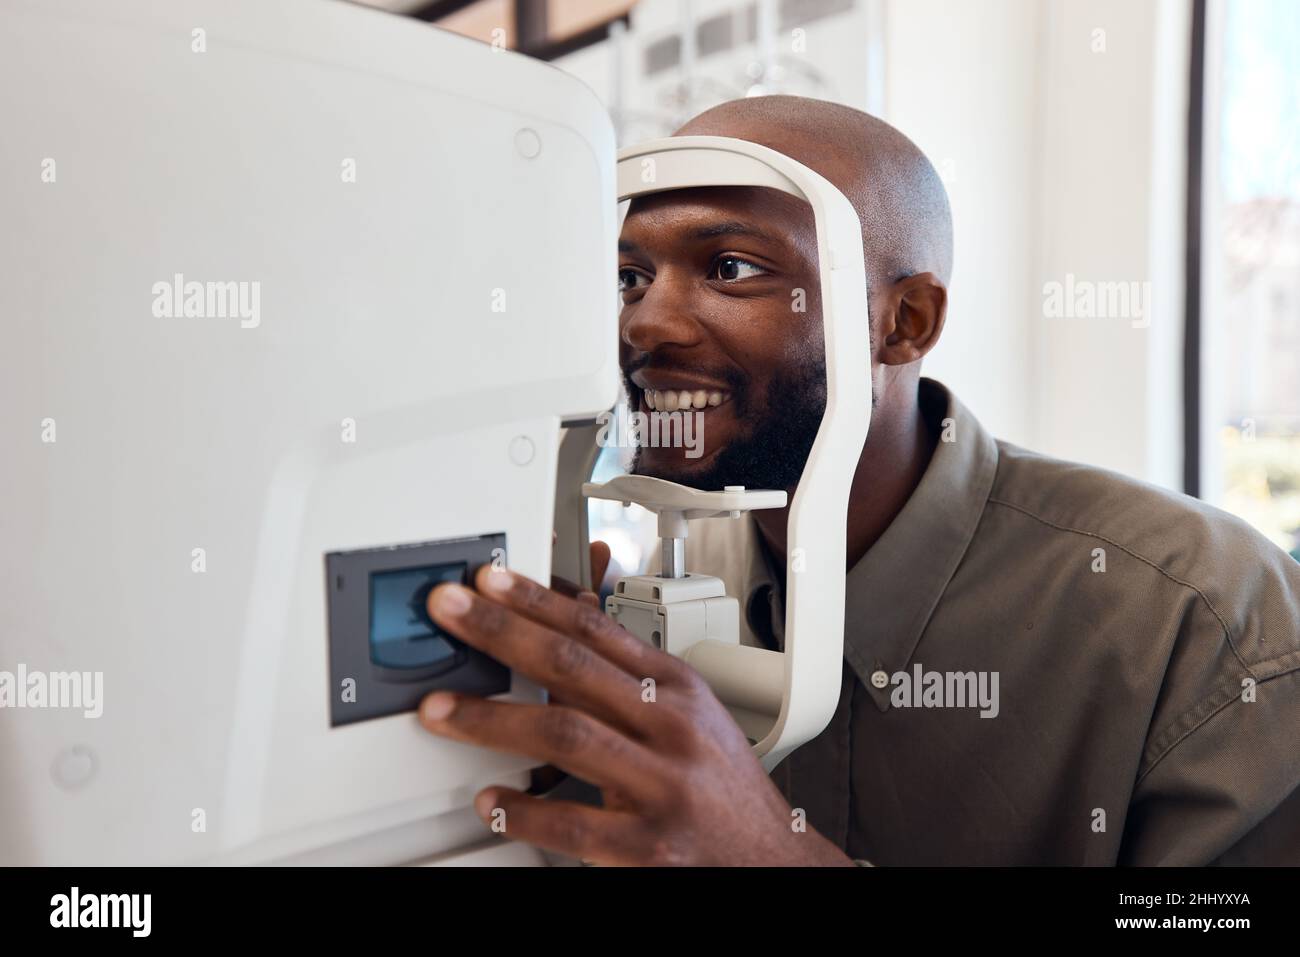 Seeing better starts right now. Shot of a young man getting his eyes examined with an autorefractor. Stock Photo